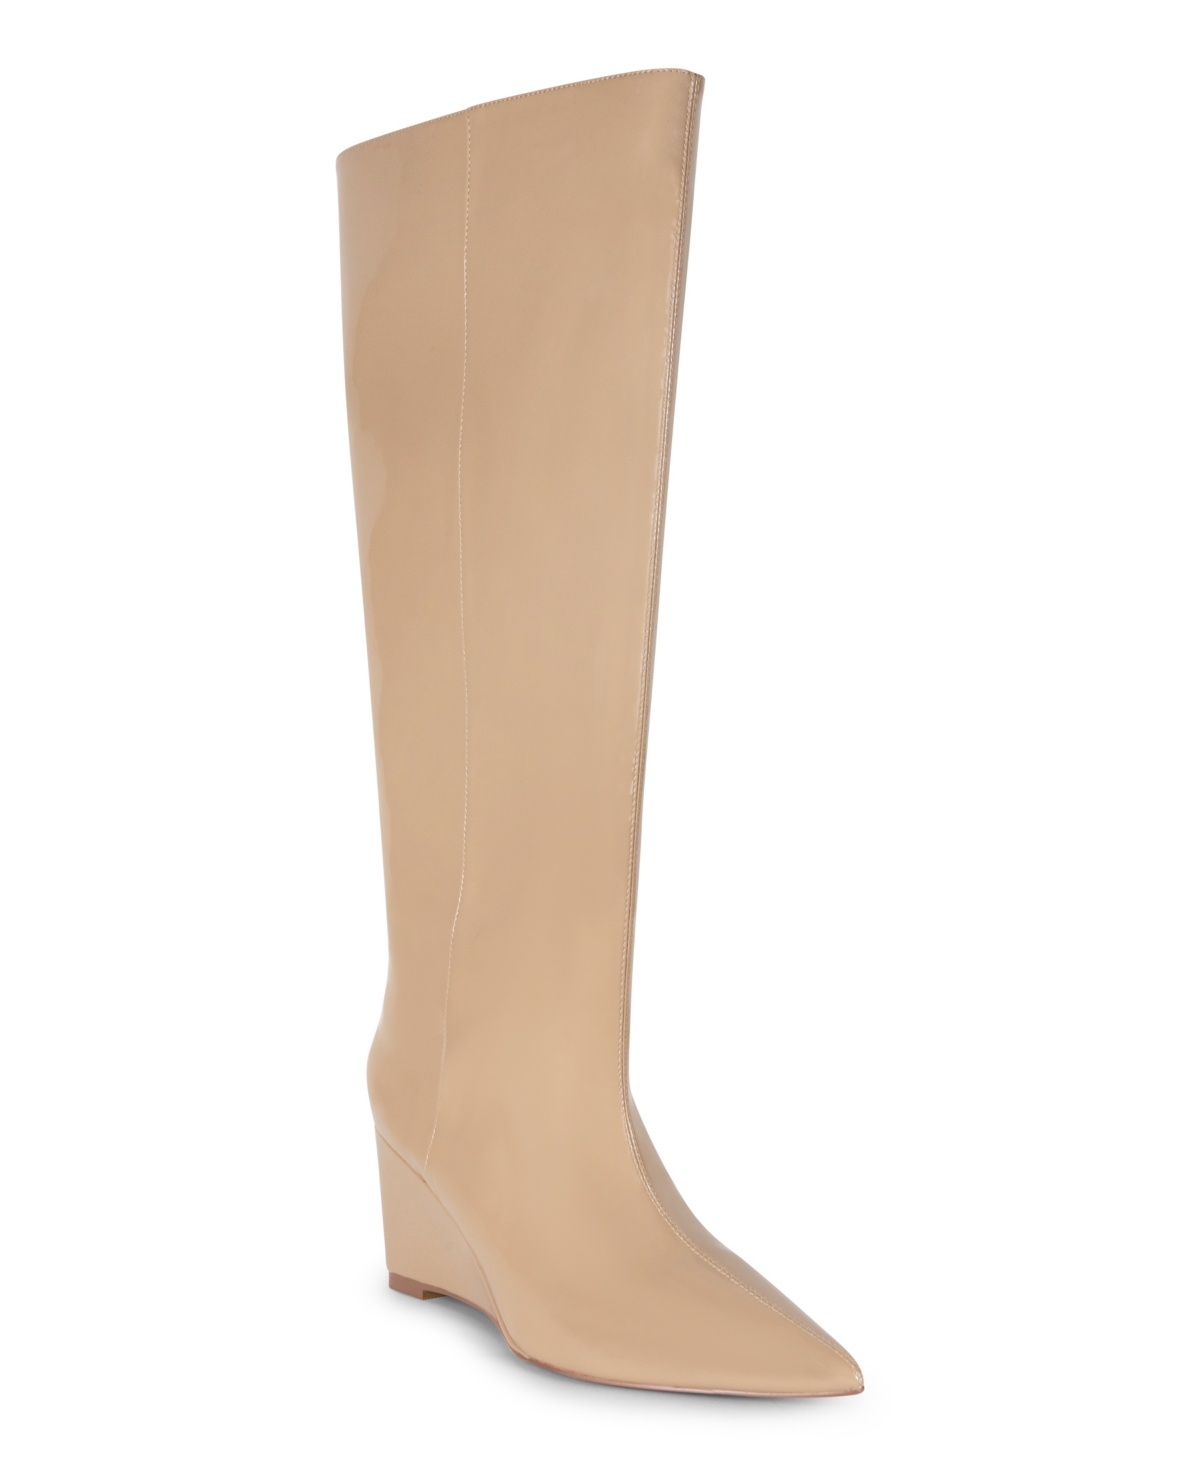 Women's Lela Pointed Toe Tall Extra Wide Calf Boots - Extended Sizes 10-14 - Nude